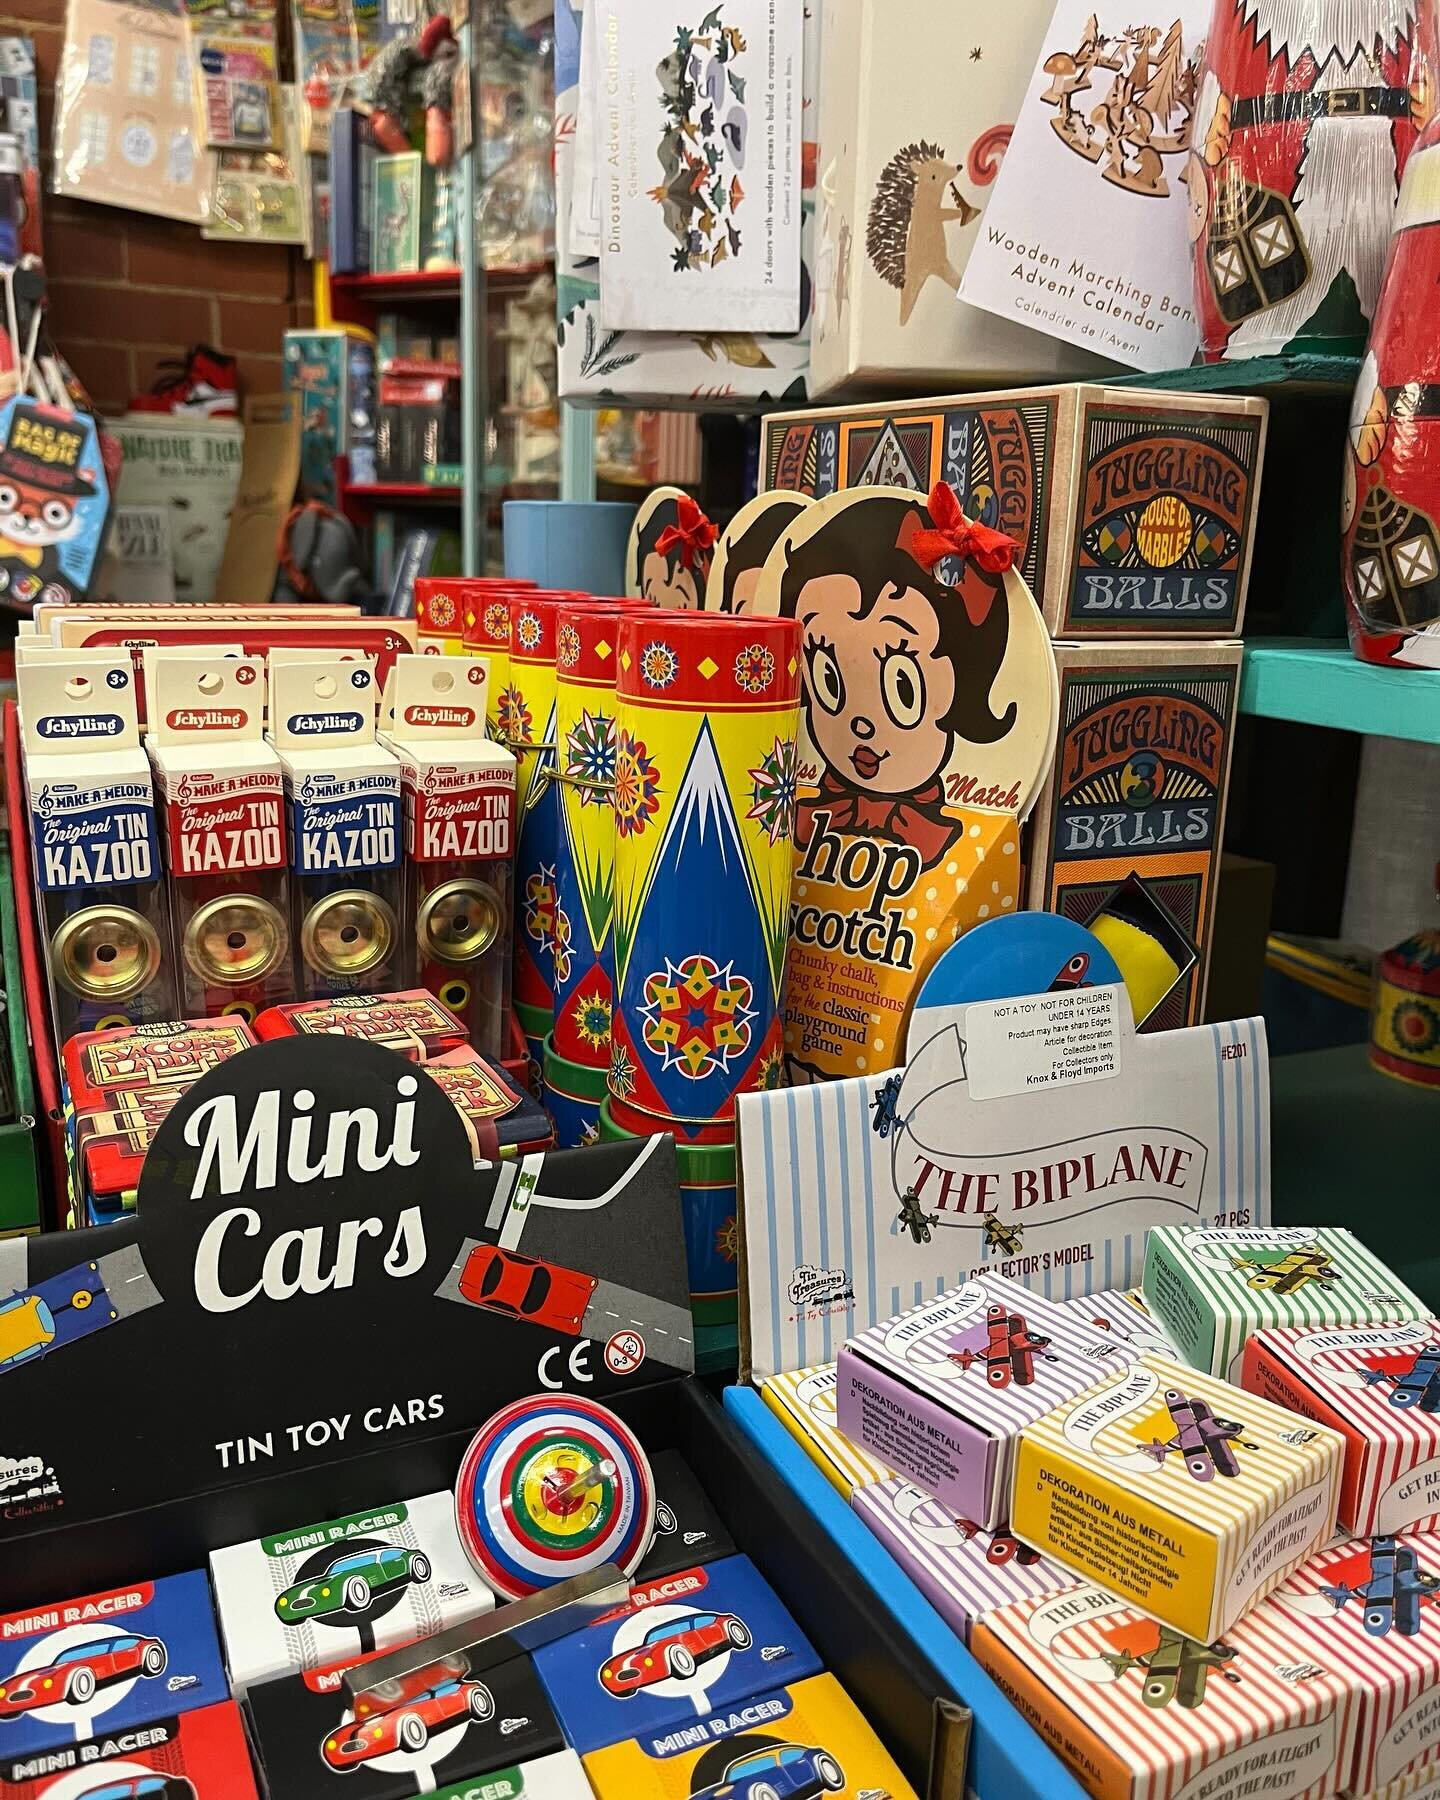 Check out the amazing selection of mini tin toy cars and minis tin toy biplanes at The Vintage Toy Box! These nostalgic toys are priced at just $4.95, making them a great deal. 

You can find The Vintage Toy Box within Dirty Janes Canberra, a special